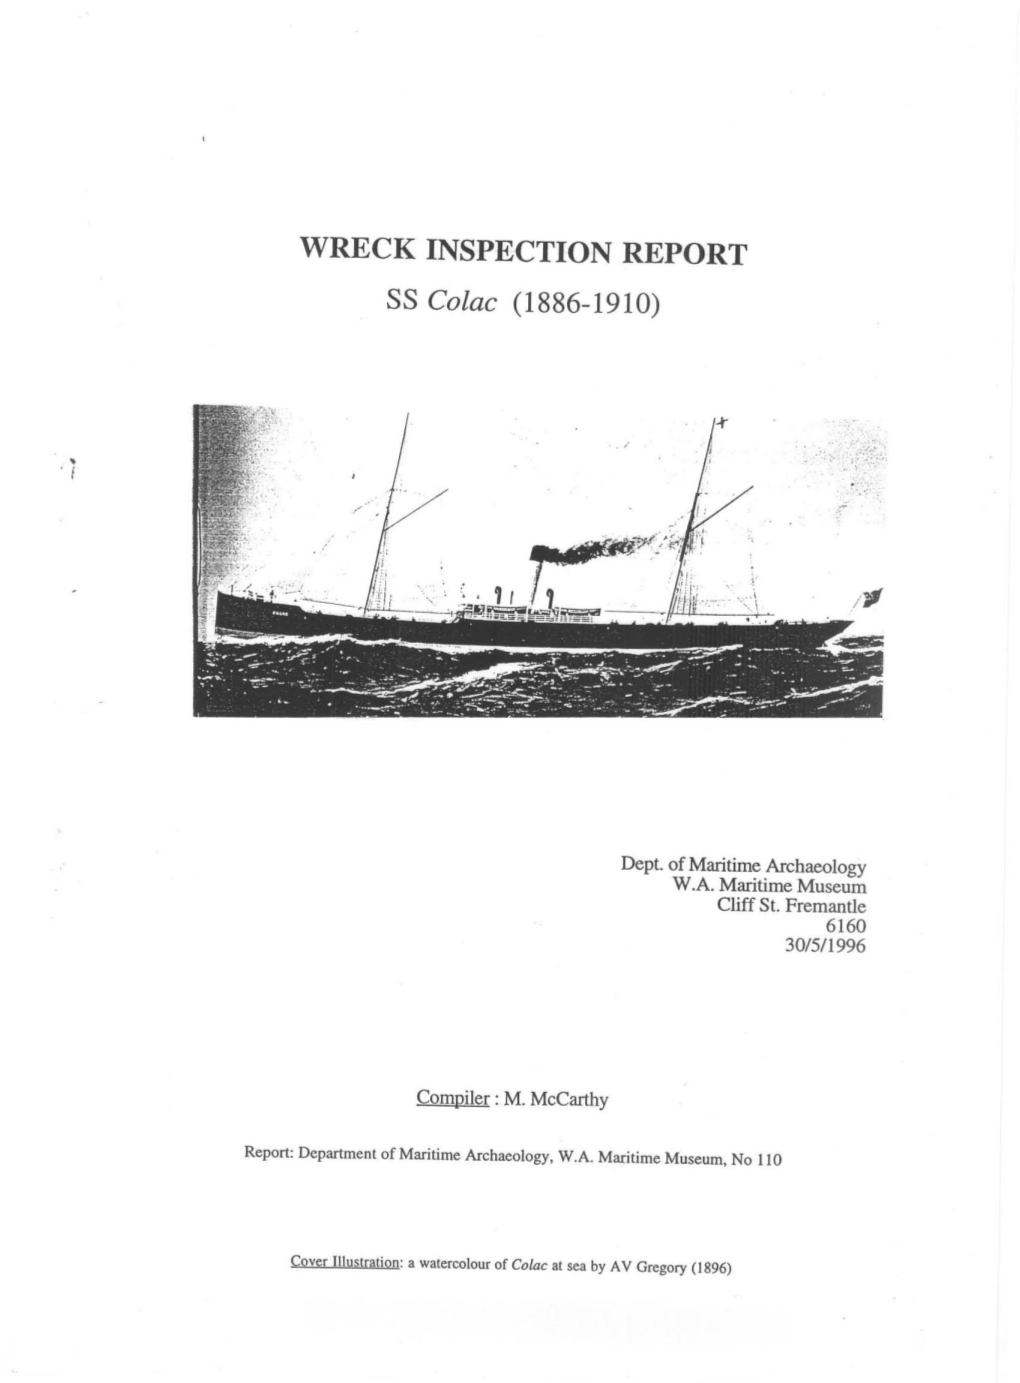 Wreck Inspection Report, SS Colac